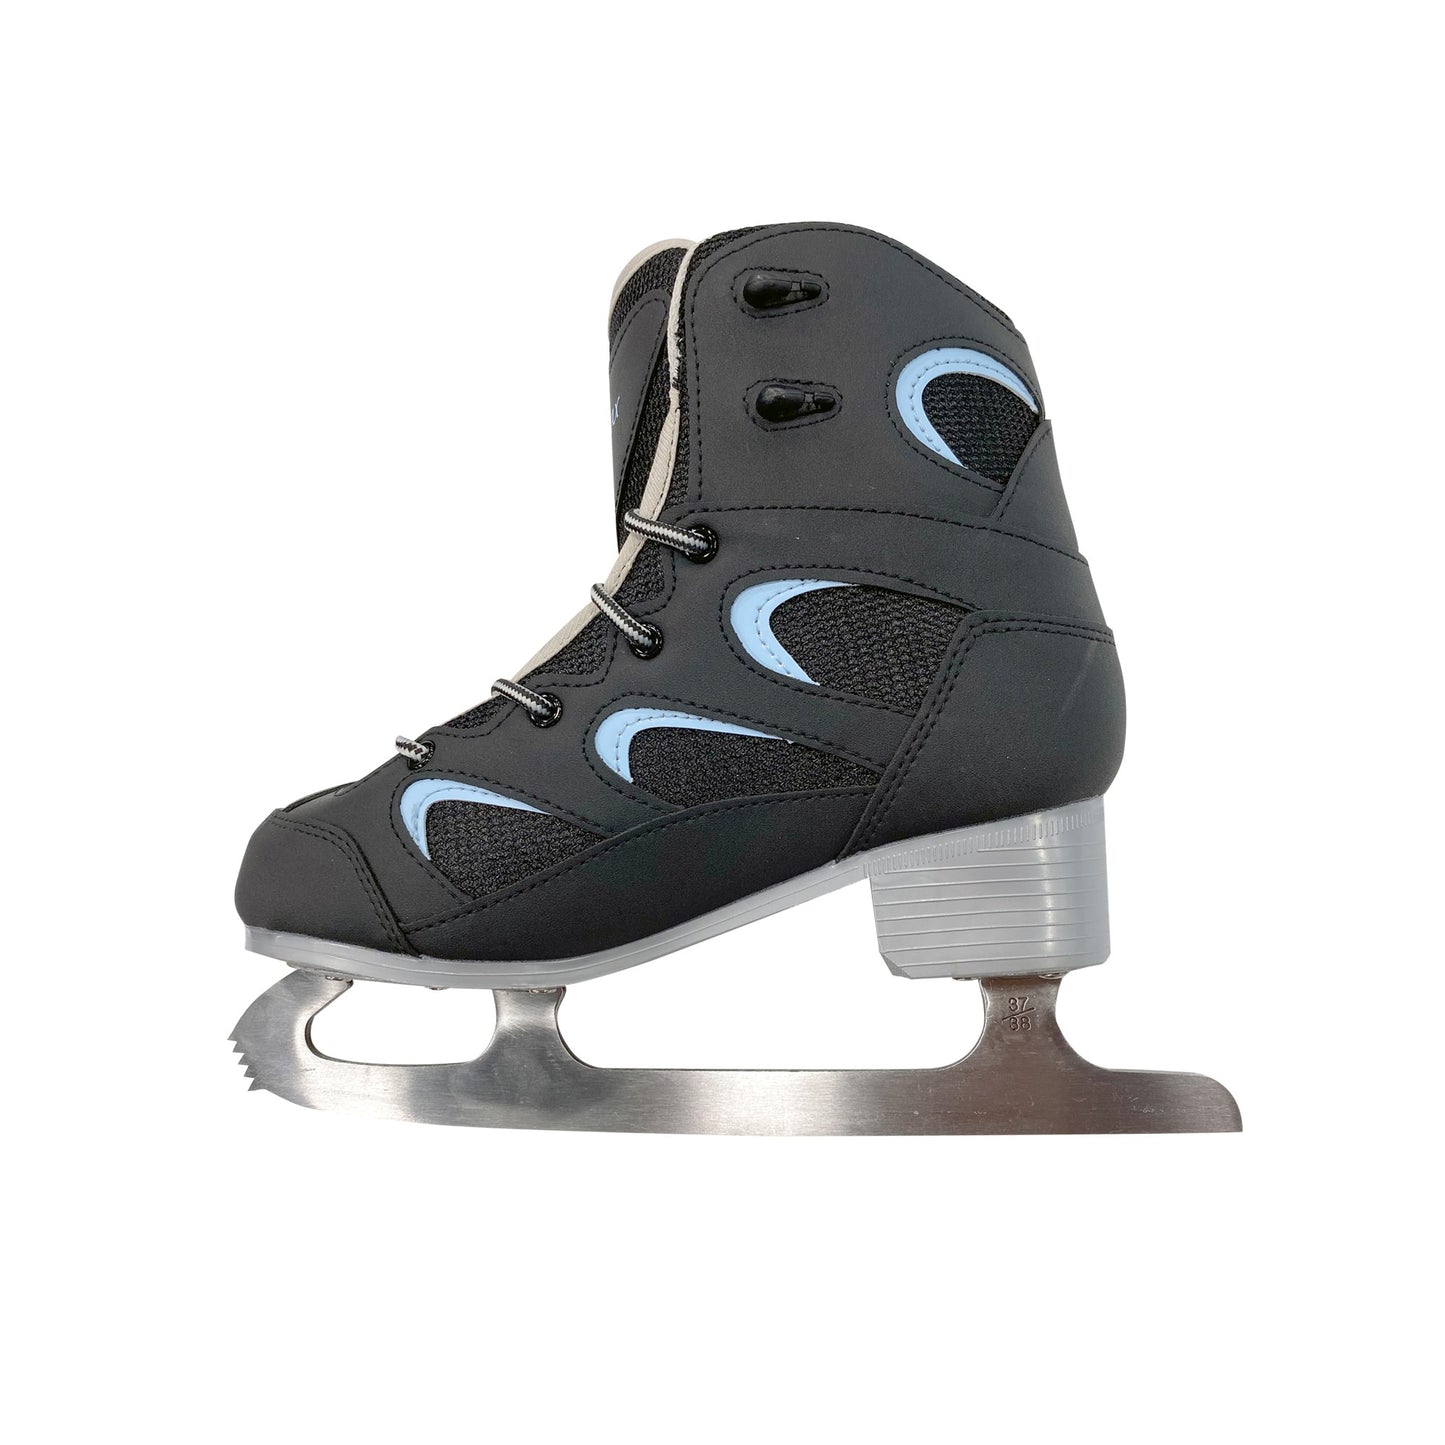 PATIN A GLACE SOFTMAX 626 FEMME